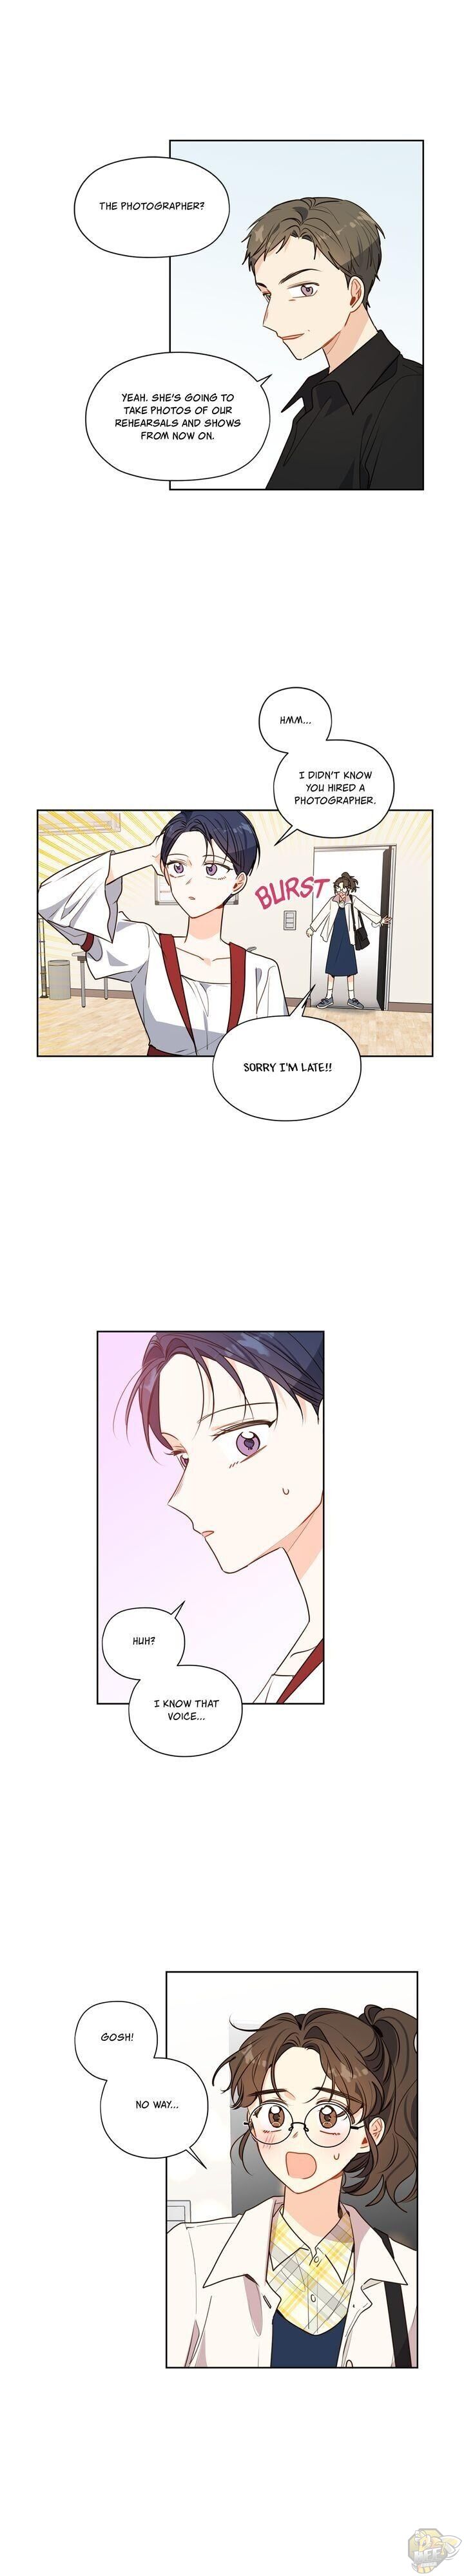 After The Curtain Call Chapter 48 - HolyManga.net